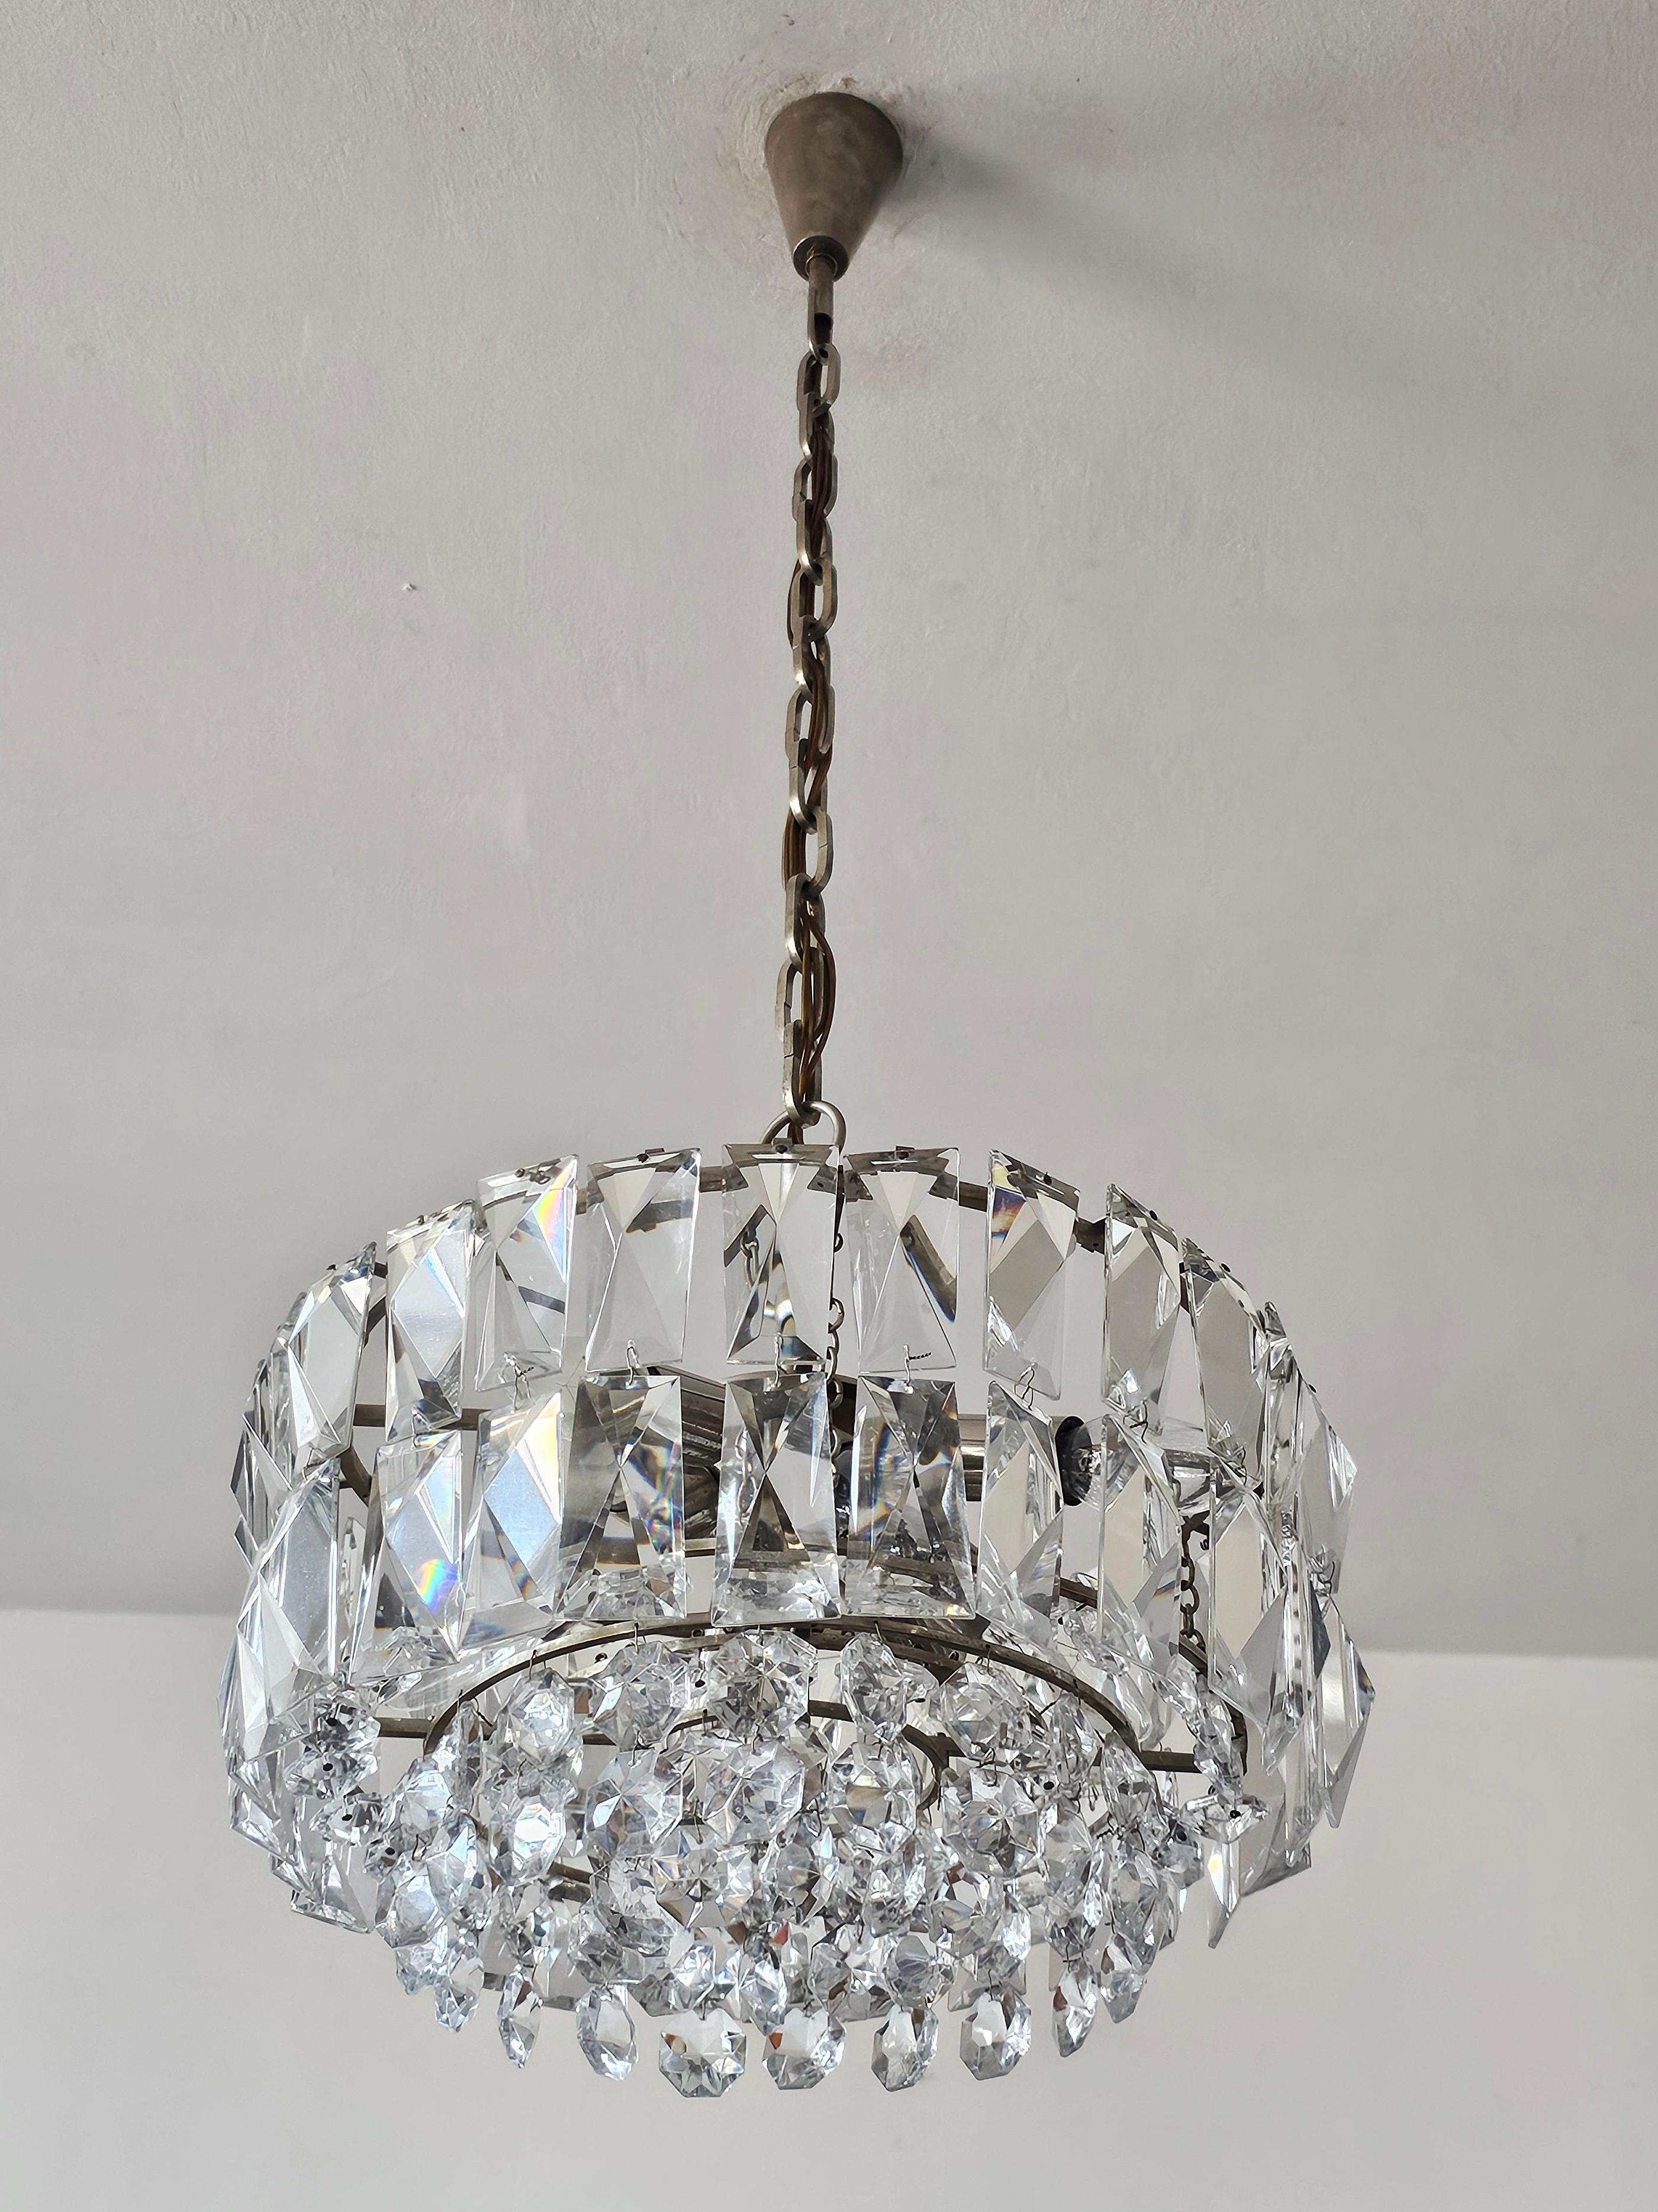 Mid-20th Century Mid Century Modern Nickel Plated Crystal Chandelier by Bakalowits, Austria 1960s For Sale